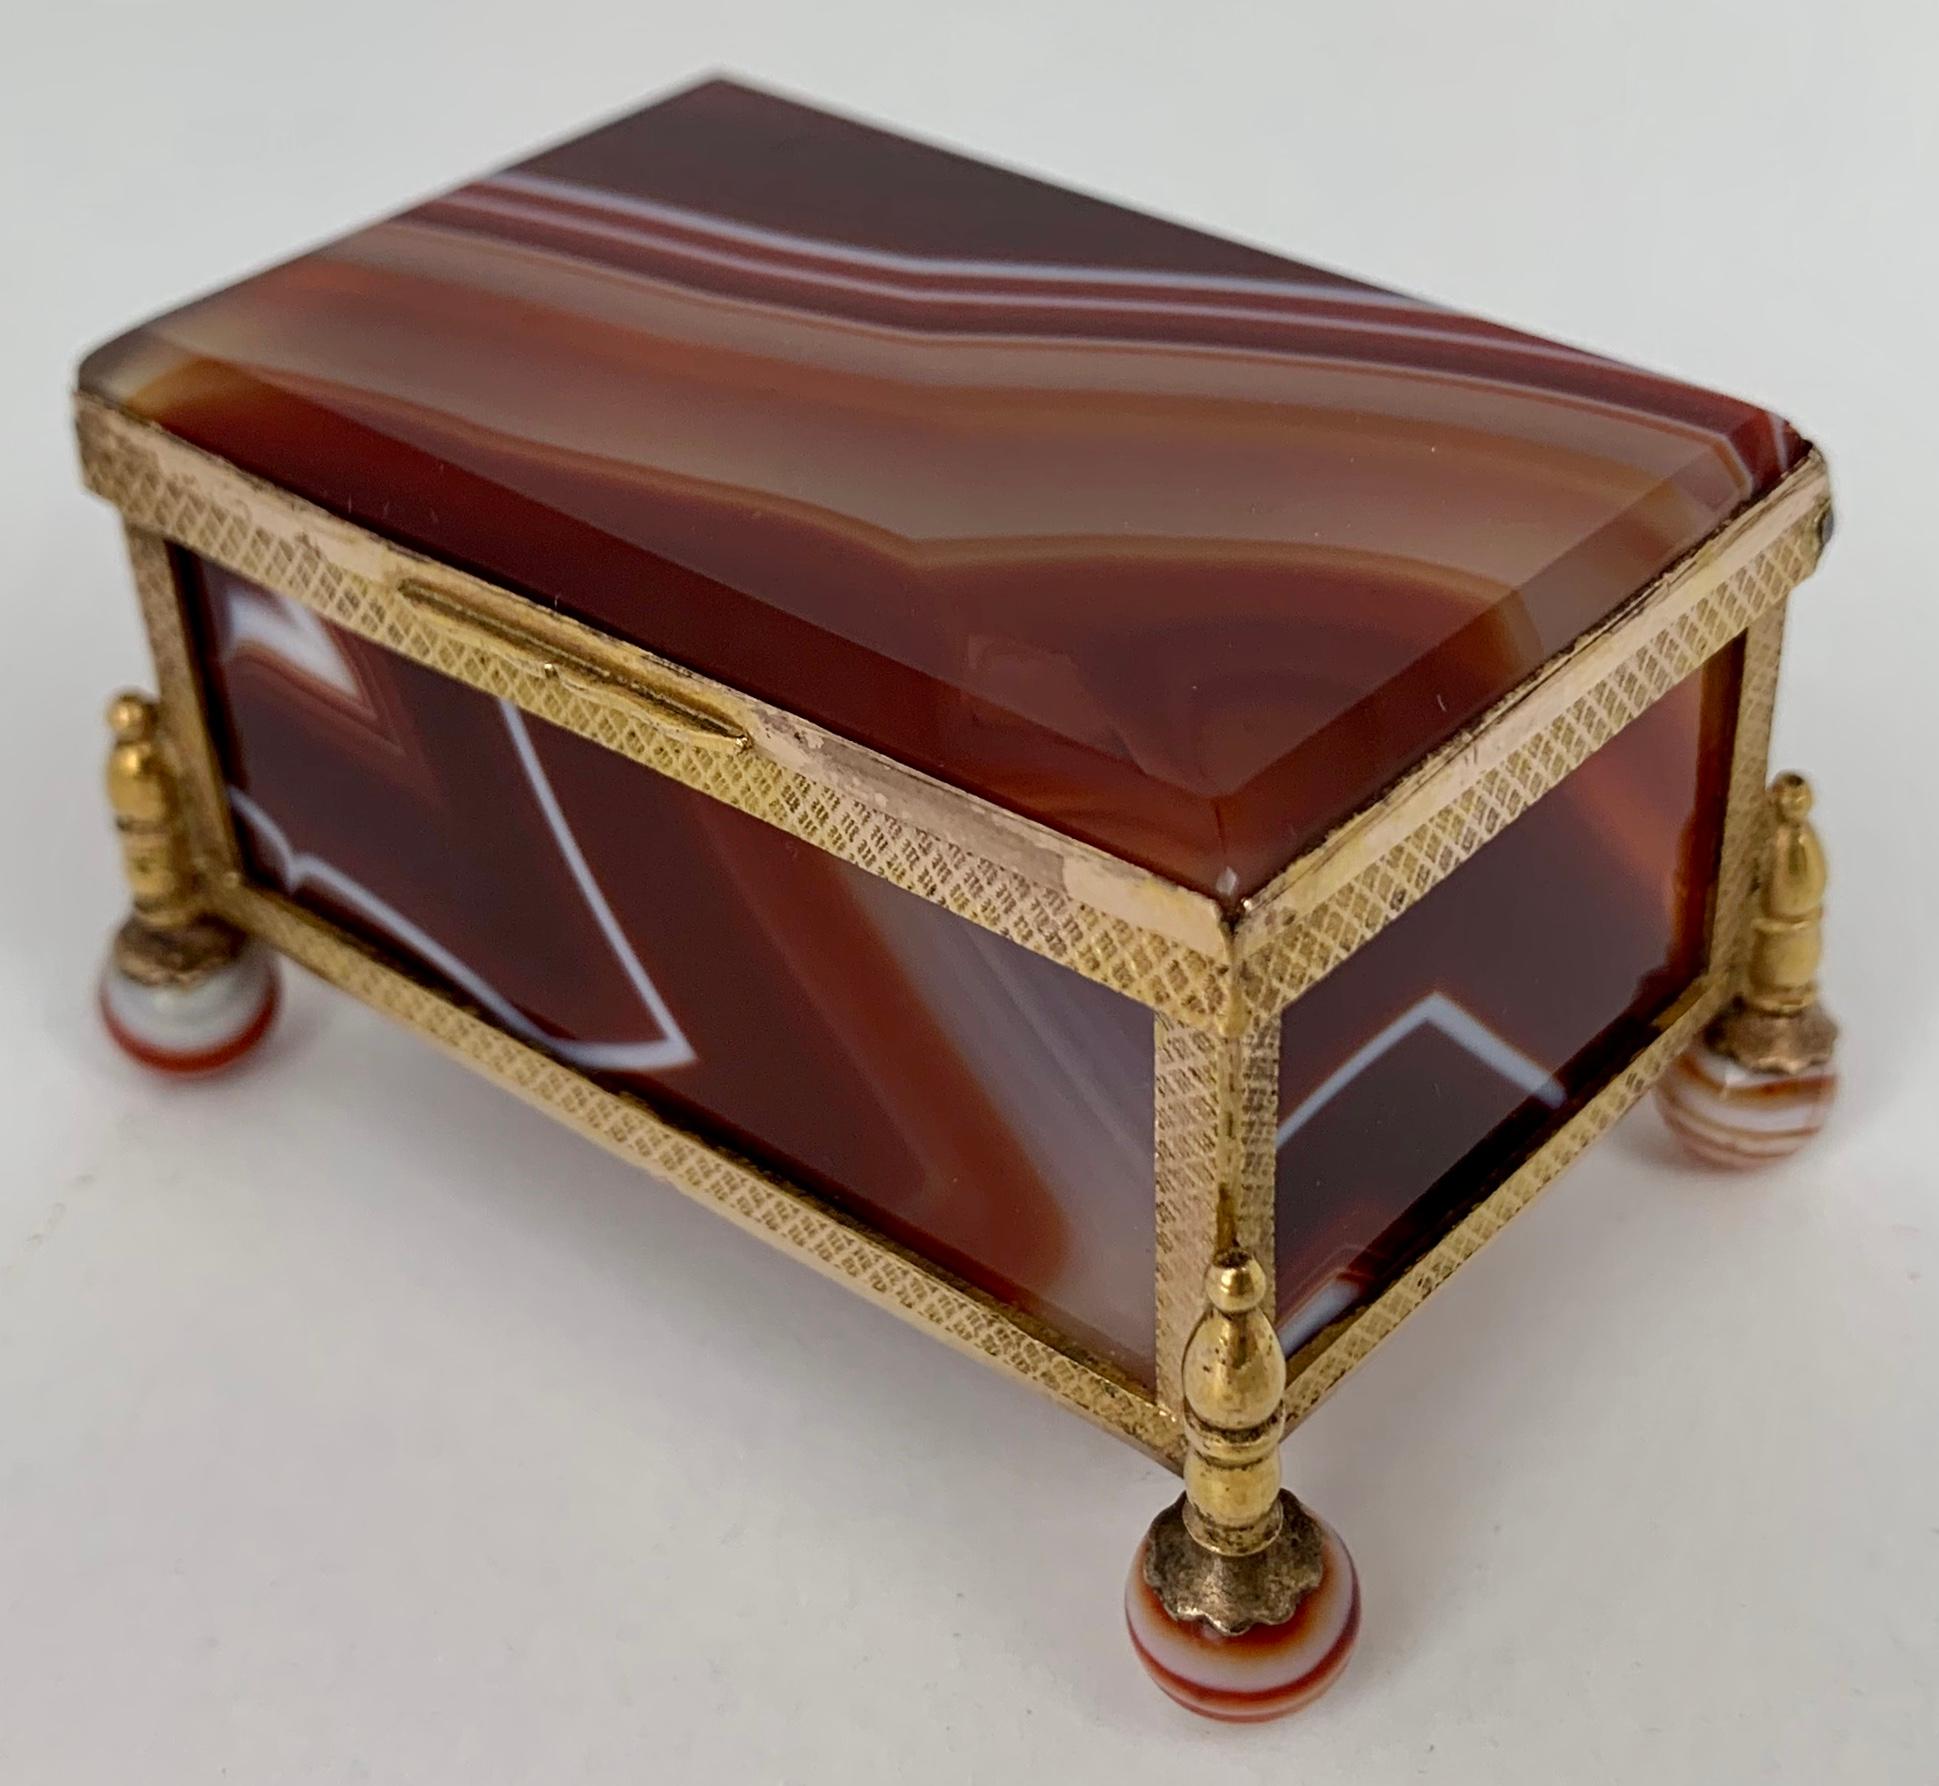 Stunning red banded hinged agate box with gilt brass frame. The pieces of stone are beveled on the interior while the petit box rests on ball feet.  Perfect for jewelry, stamps or whatever you desire.  Hand polished in our workshop. (19th